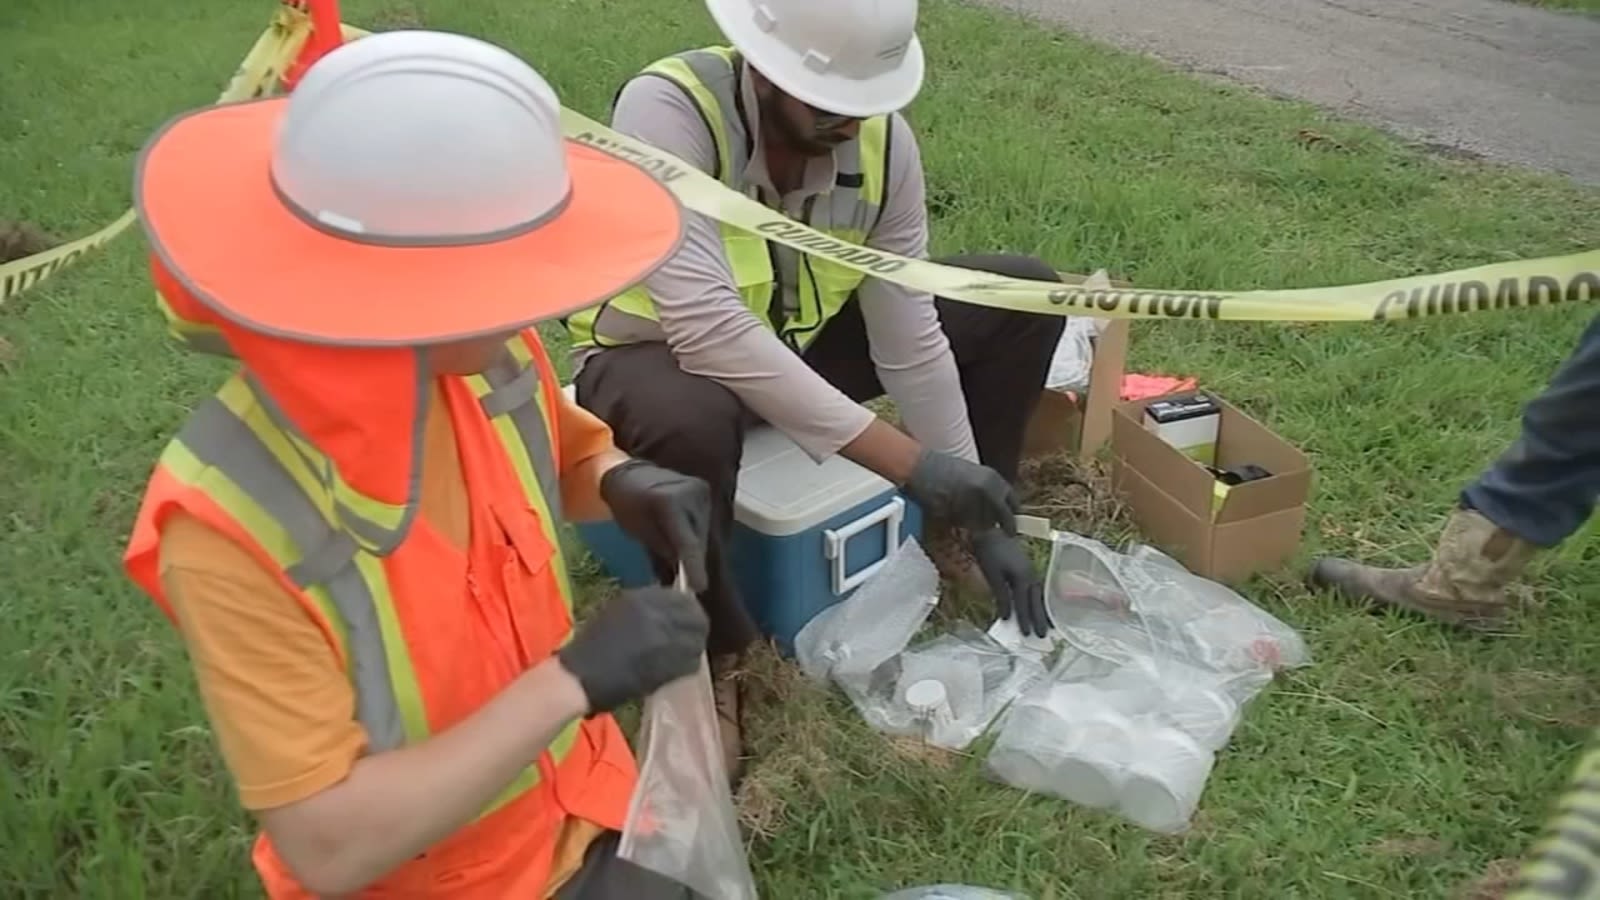 Environmental studies and soil collection for chemical testing underway in Fifth Ward